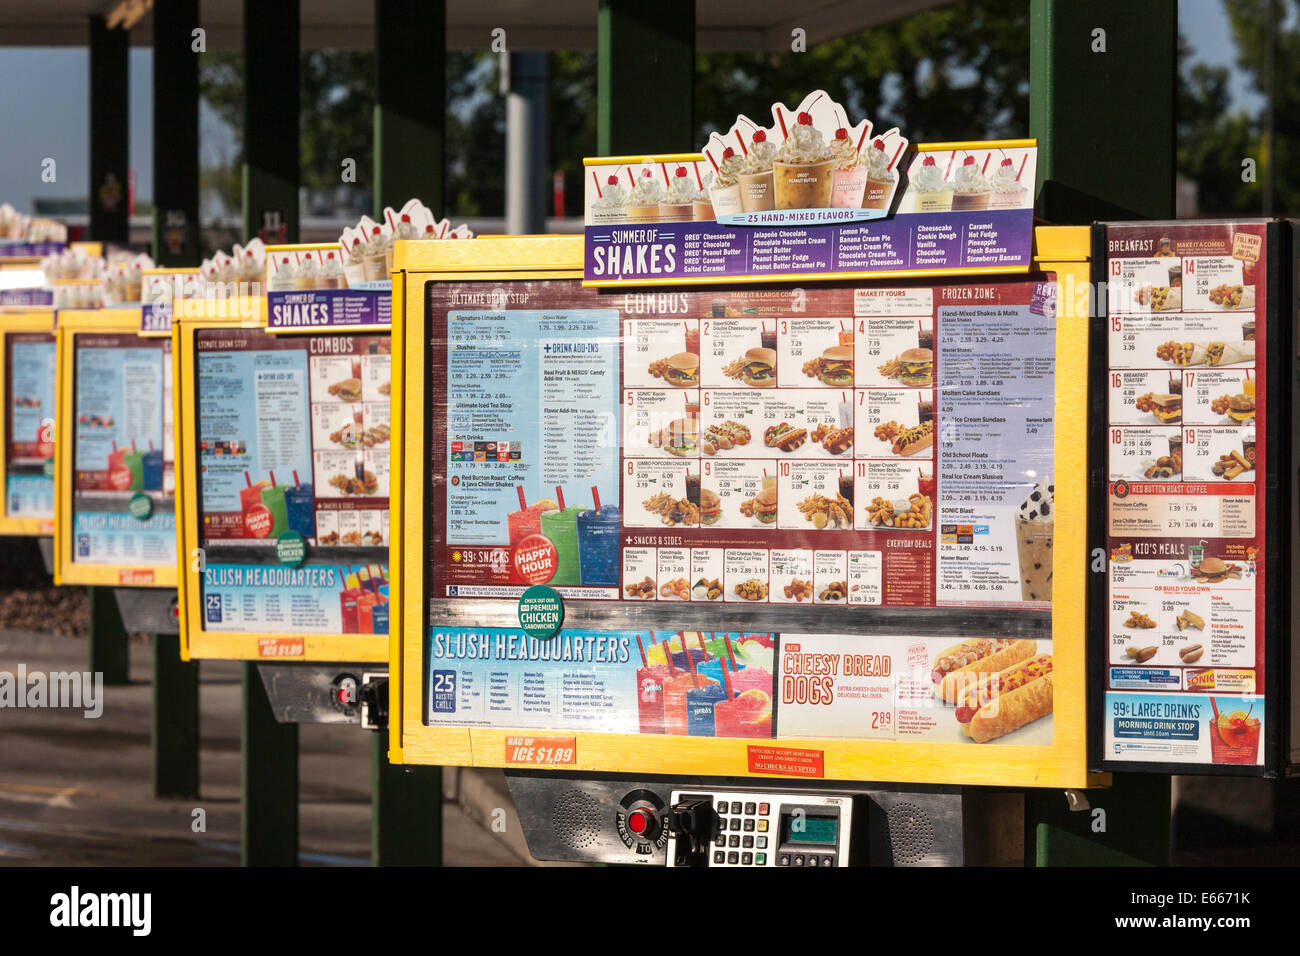 SONIC DRIVE-IN - 179 Photos & 486 Reviews - 25502 Jeronimo Rd, Mission  Viejo, California - Fast Food - Restaurant Reviews - Phone Number - Menu -  Yelp